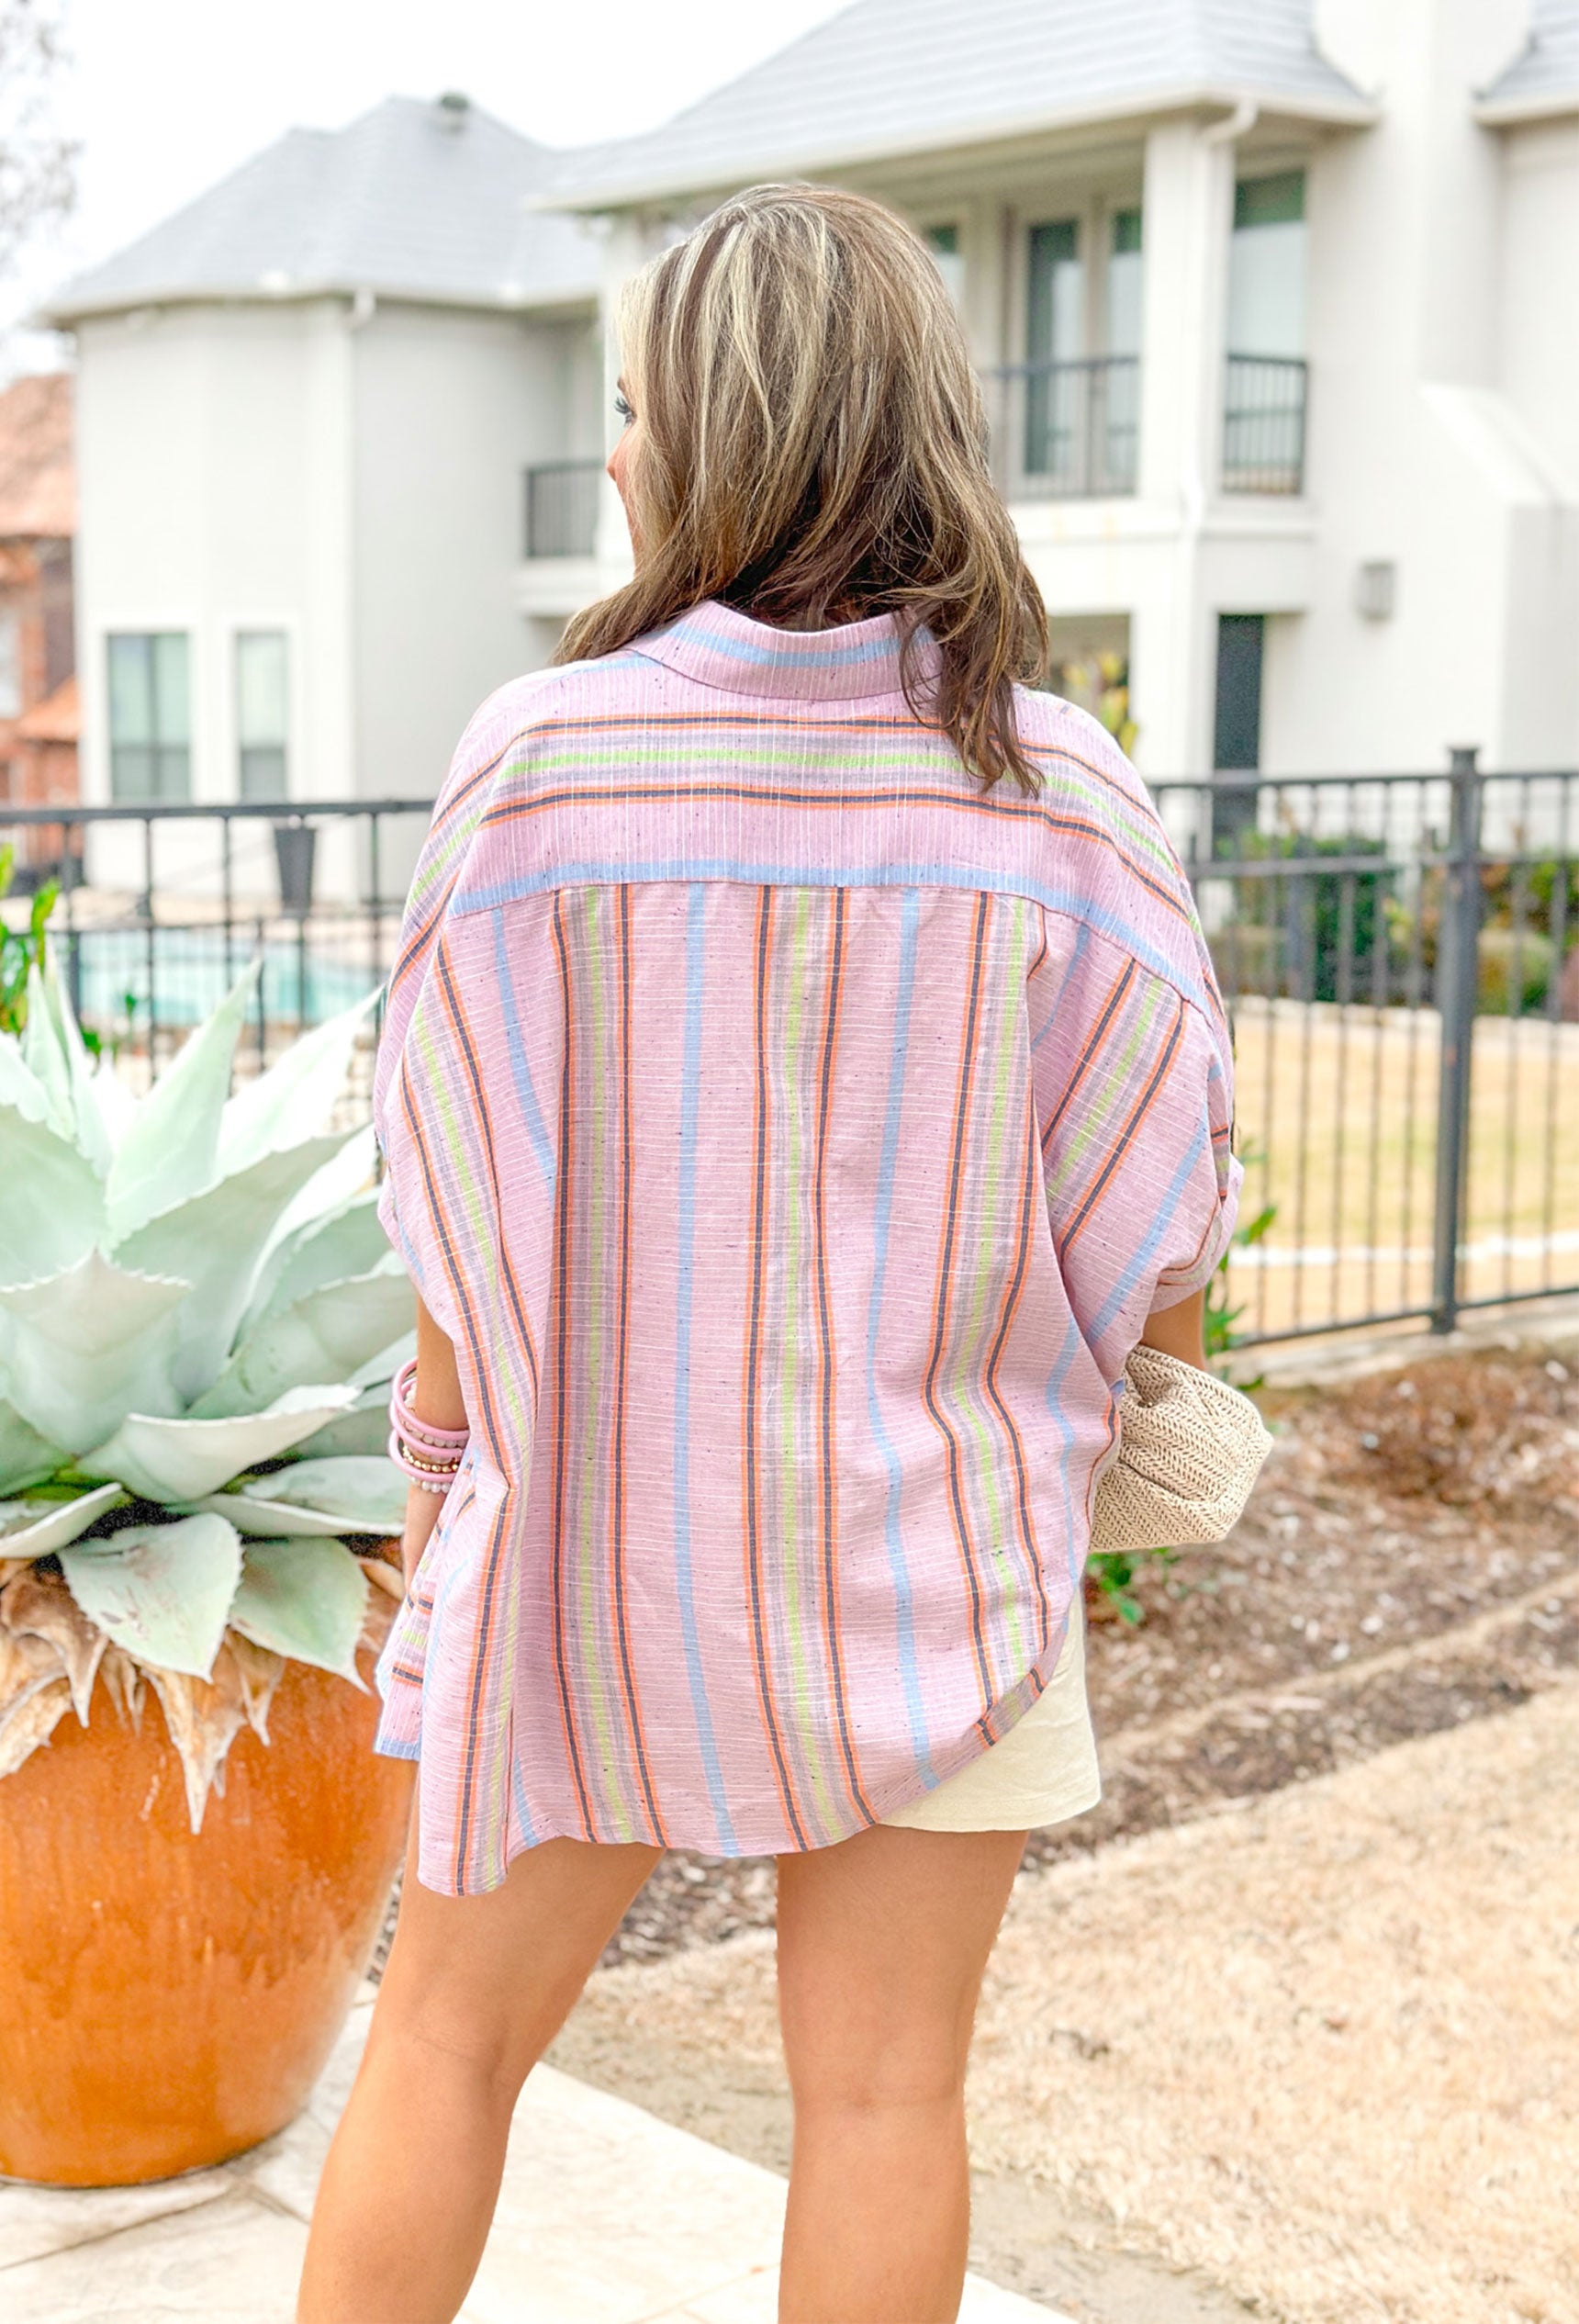 First Things First Top in Rose Pink, light purple-ish/pink blouse with sage, orange, grey, blue and white stripes going horizontal on one side and vertical on the other side